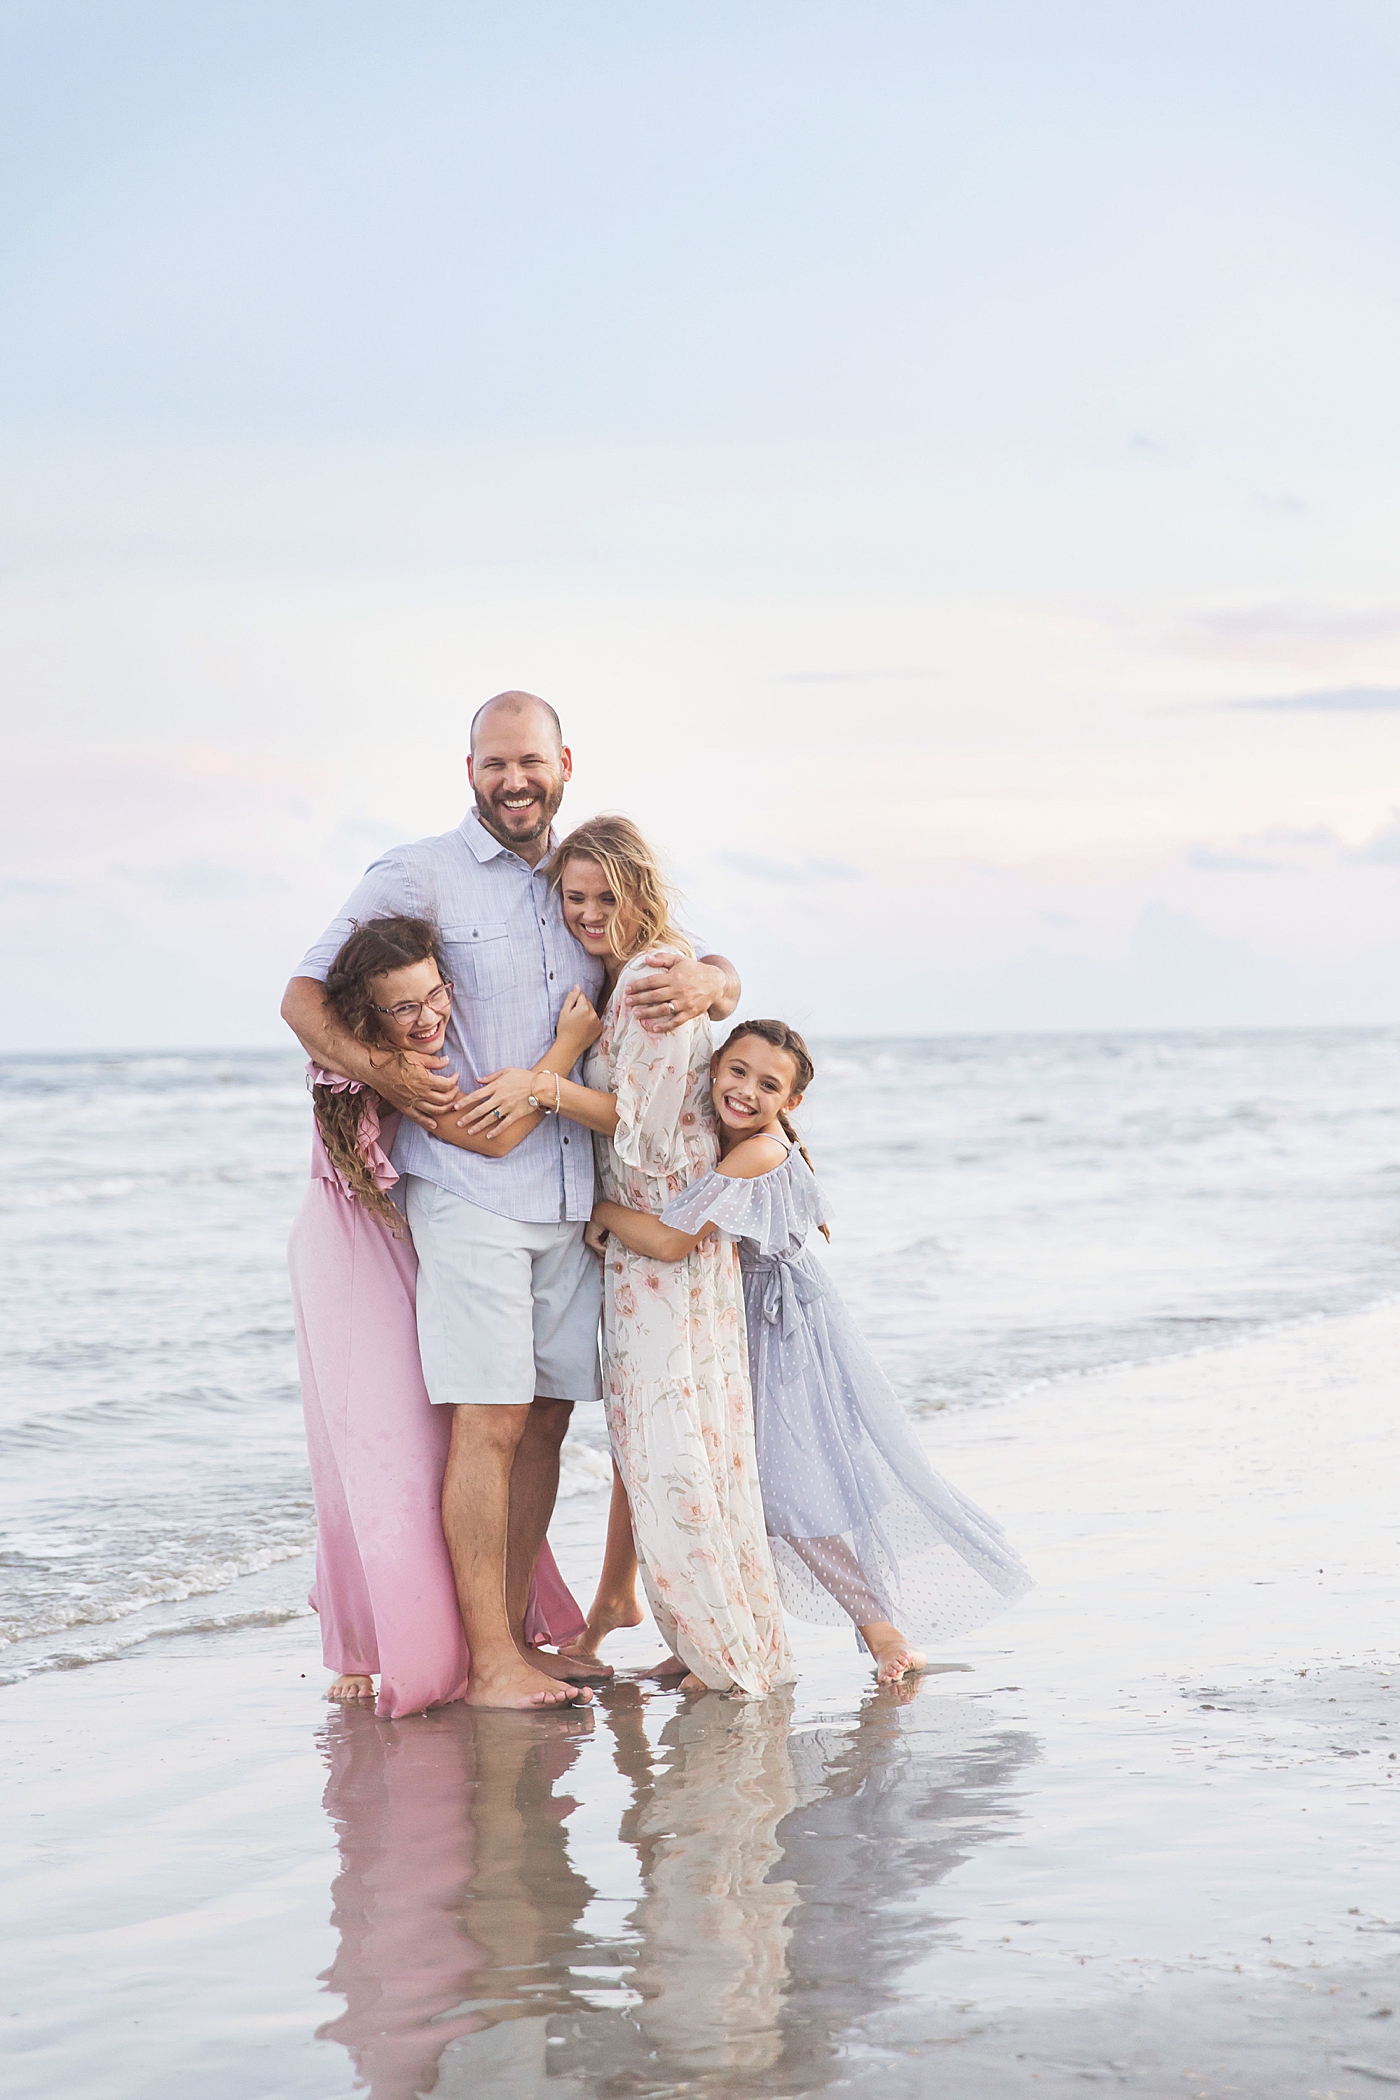 Family hugging during photoshoot on the beach. Photo by Fresh Light Photography.